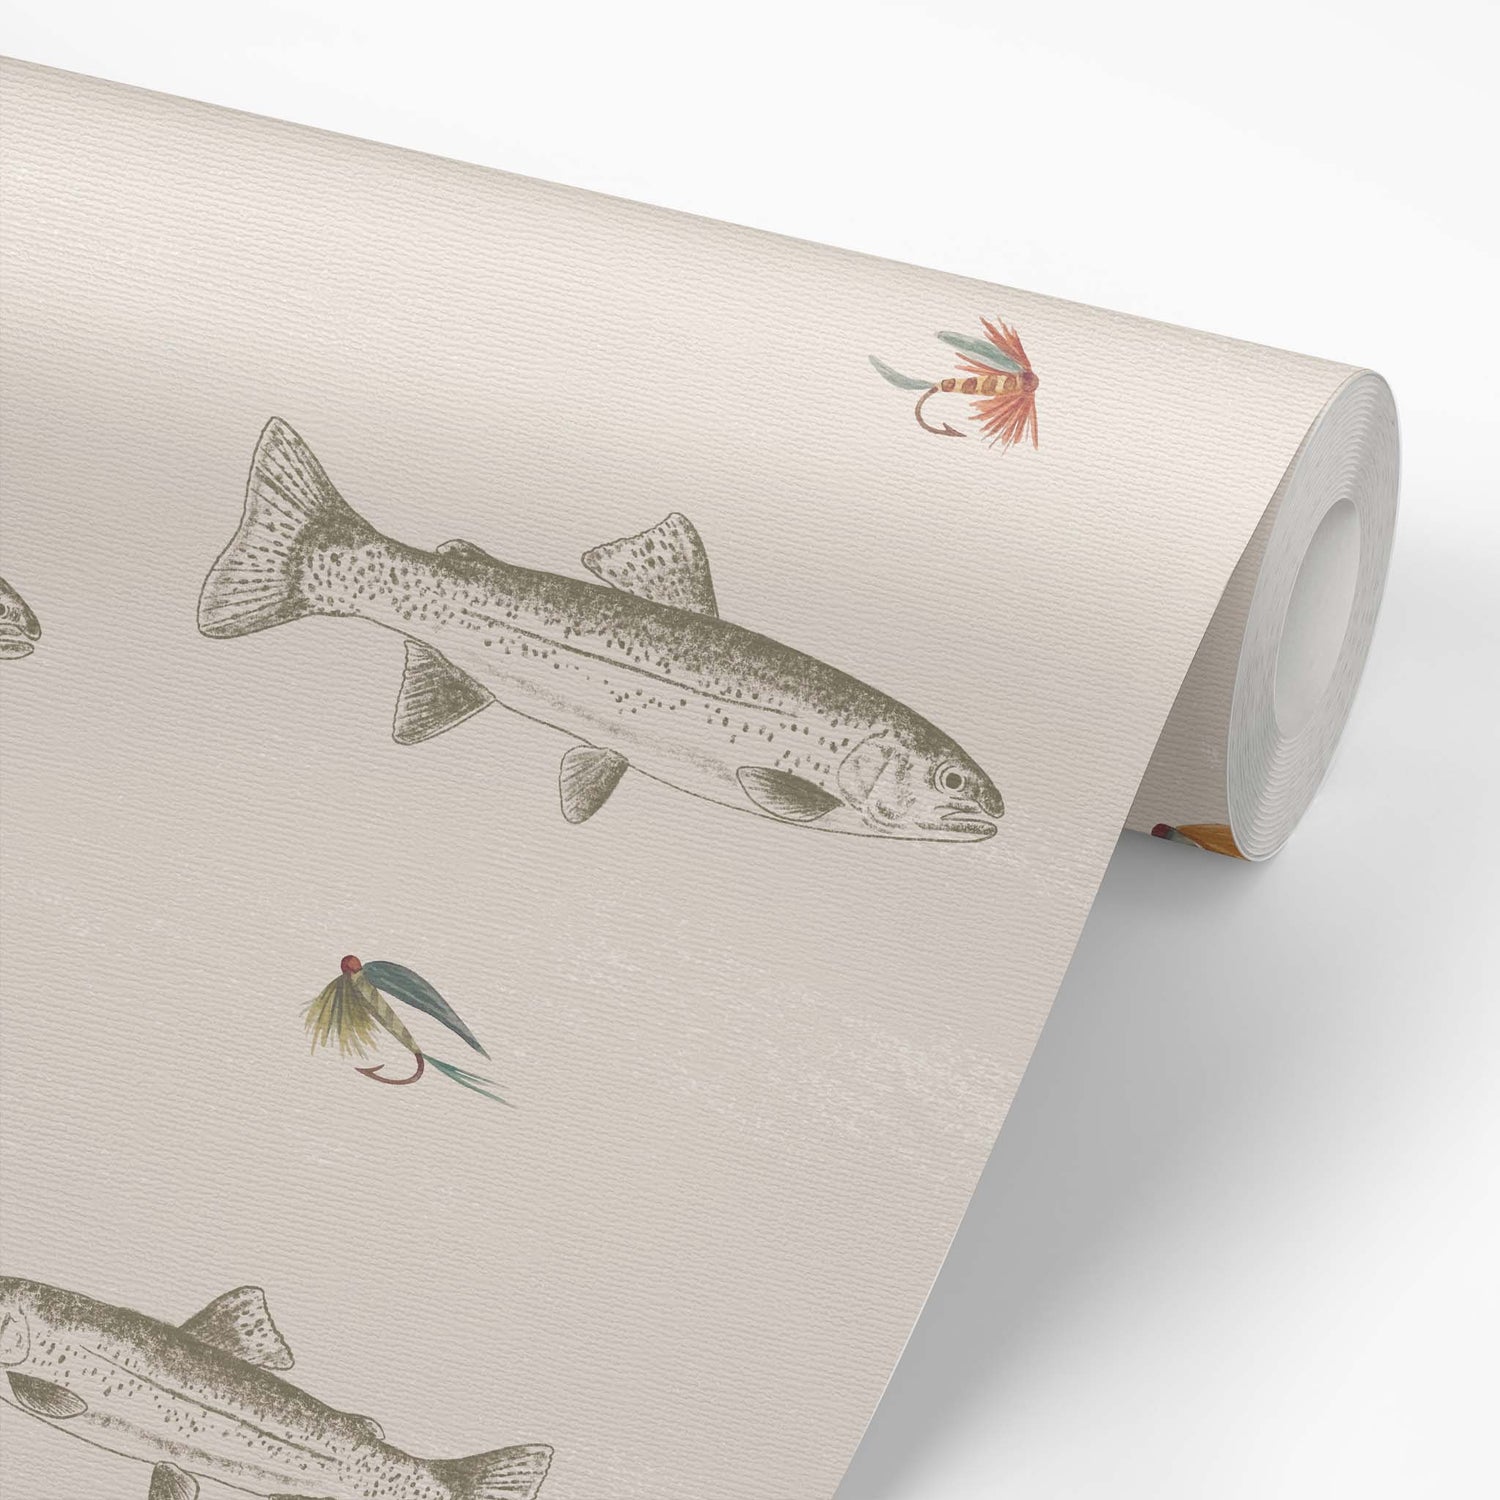 This wallpaper roll shows our Fly Fishing Wallpaper in Green. This peel and stick, removable wallpaper was designed by artist Mariah Cottrell and features trout and flies for a calm river scene.